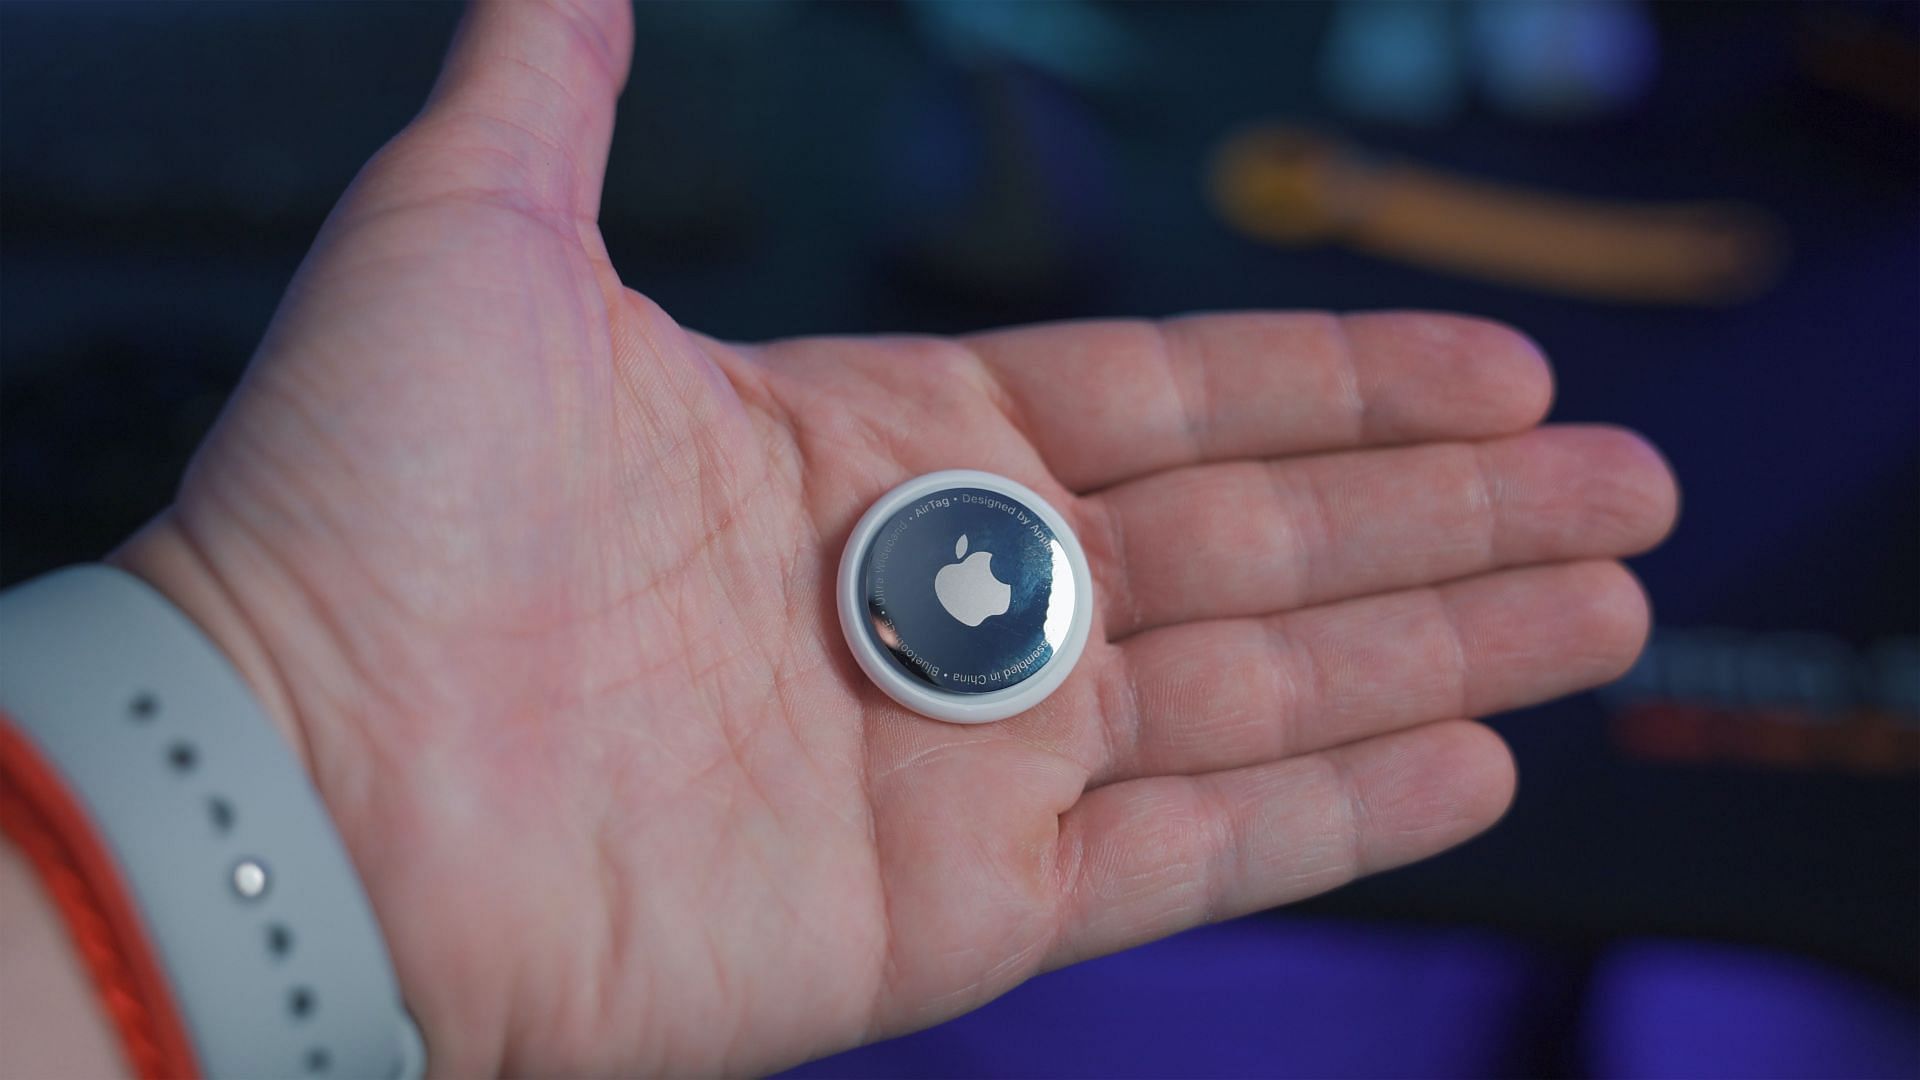 Apple AirTag with Ultra-Wideband (UWB) unveiled to take on the